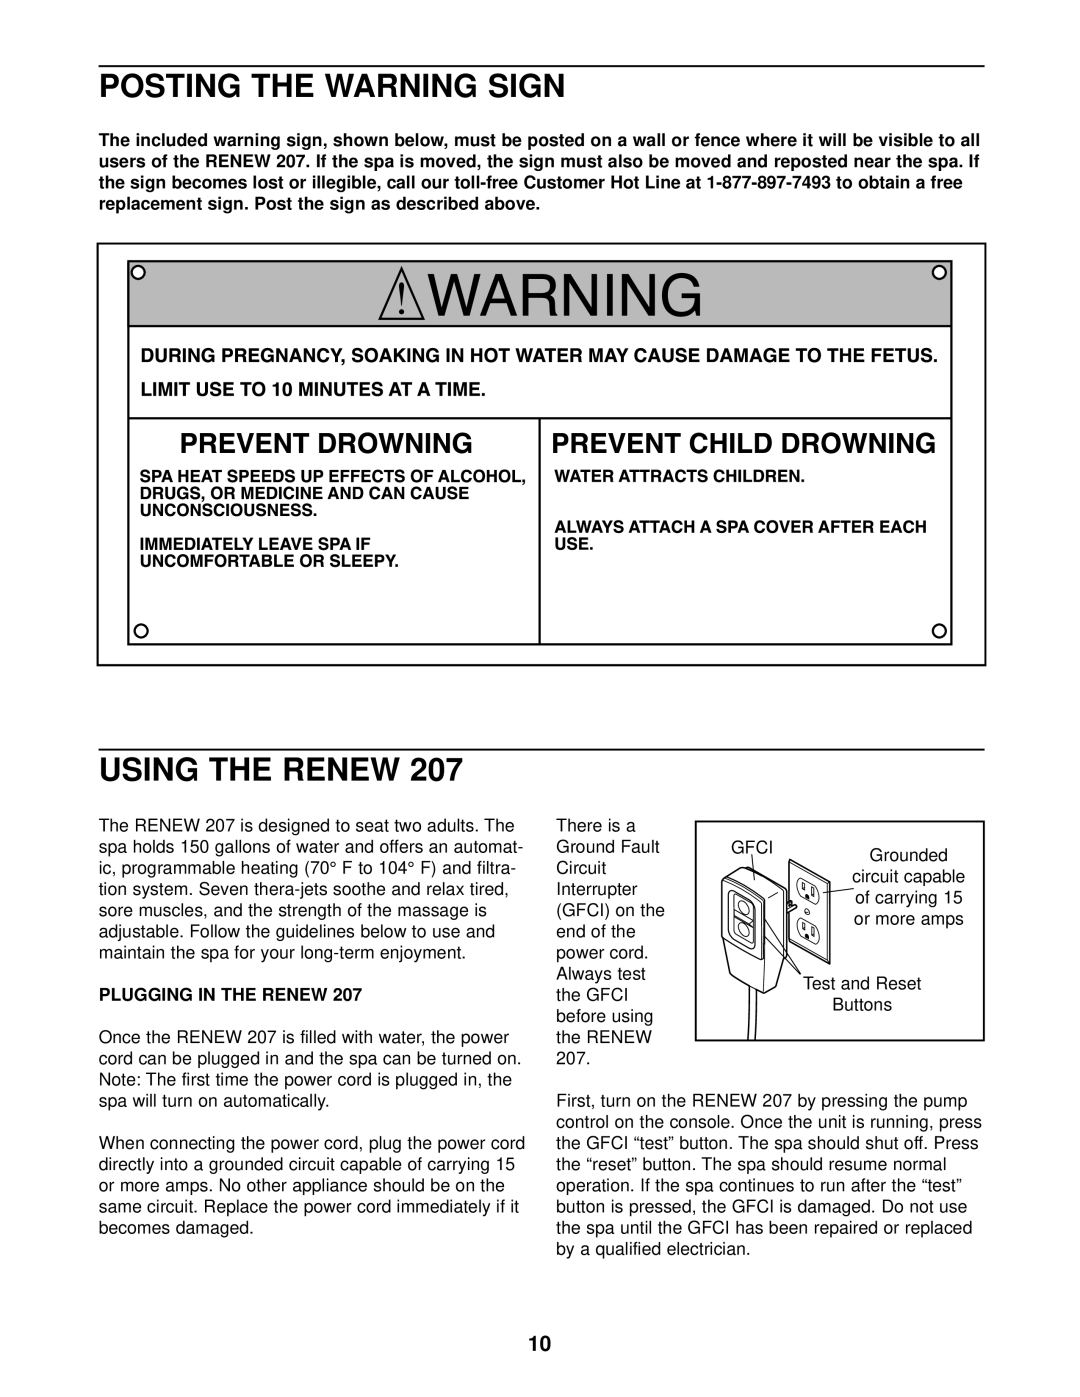 Image IMSG20701, IMSW20701, IMSB20701 user manual Posting The Warning Sign, Using The Renew, Plugging In The Renew 